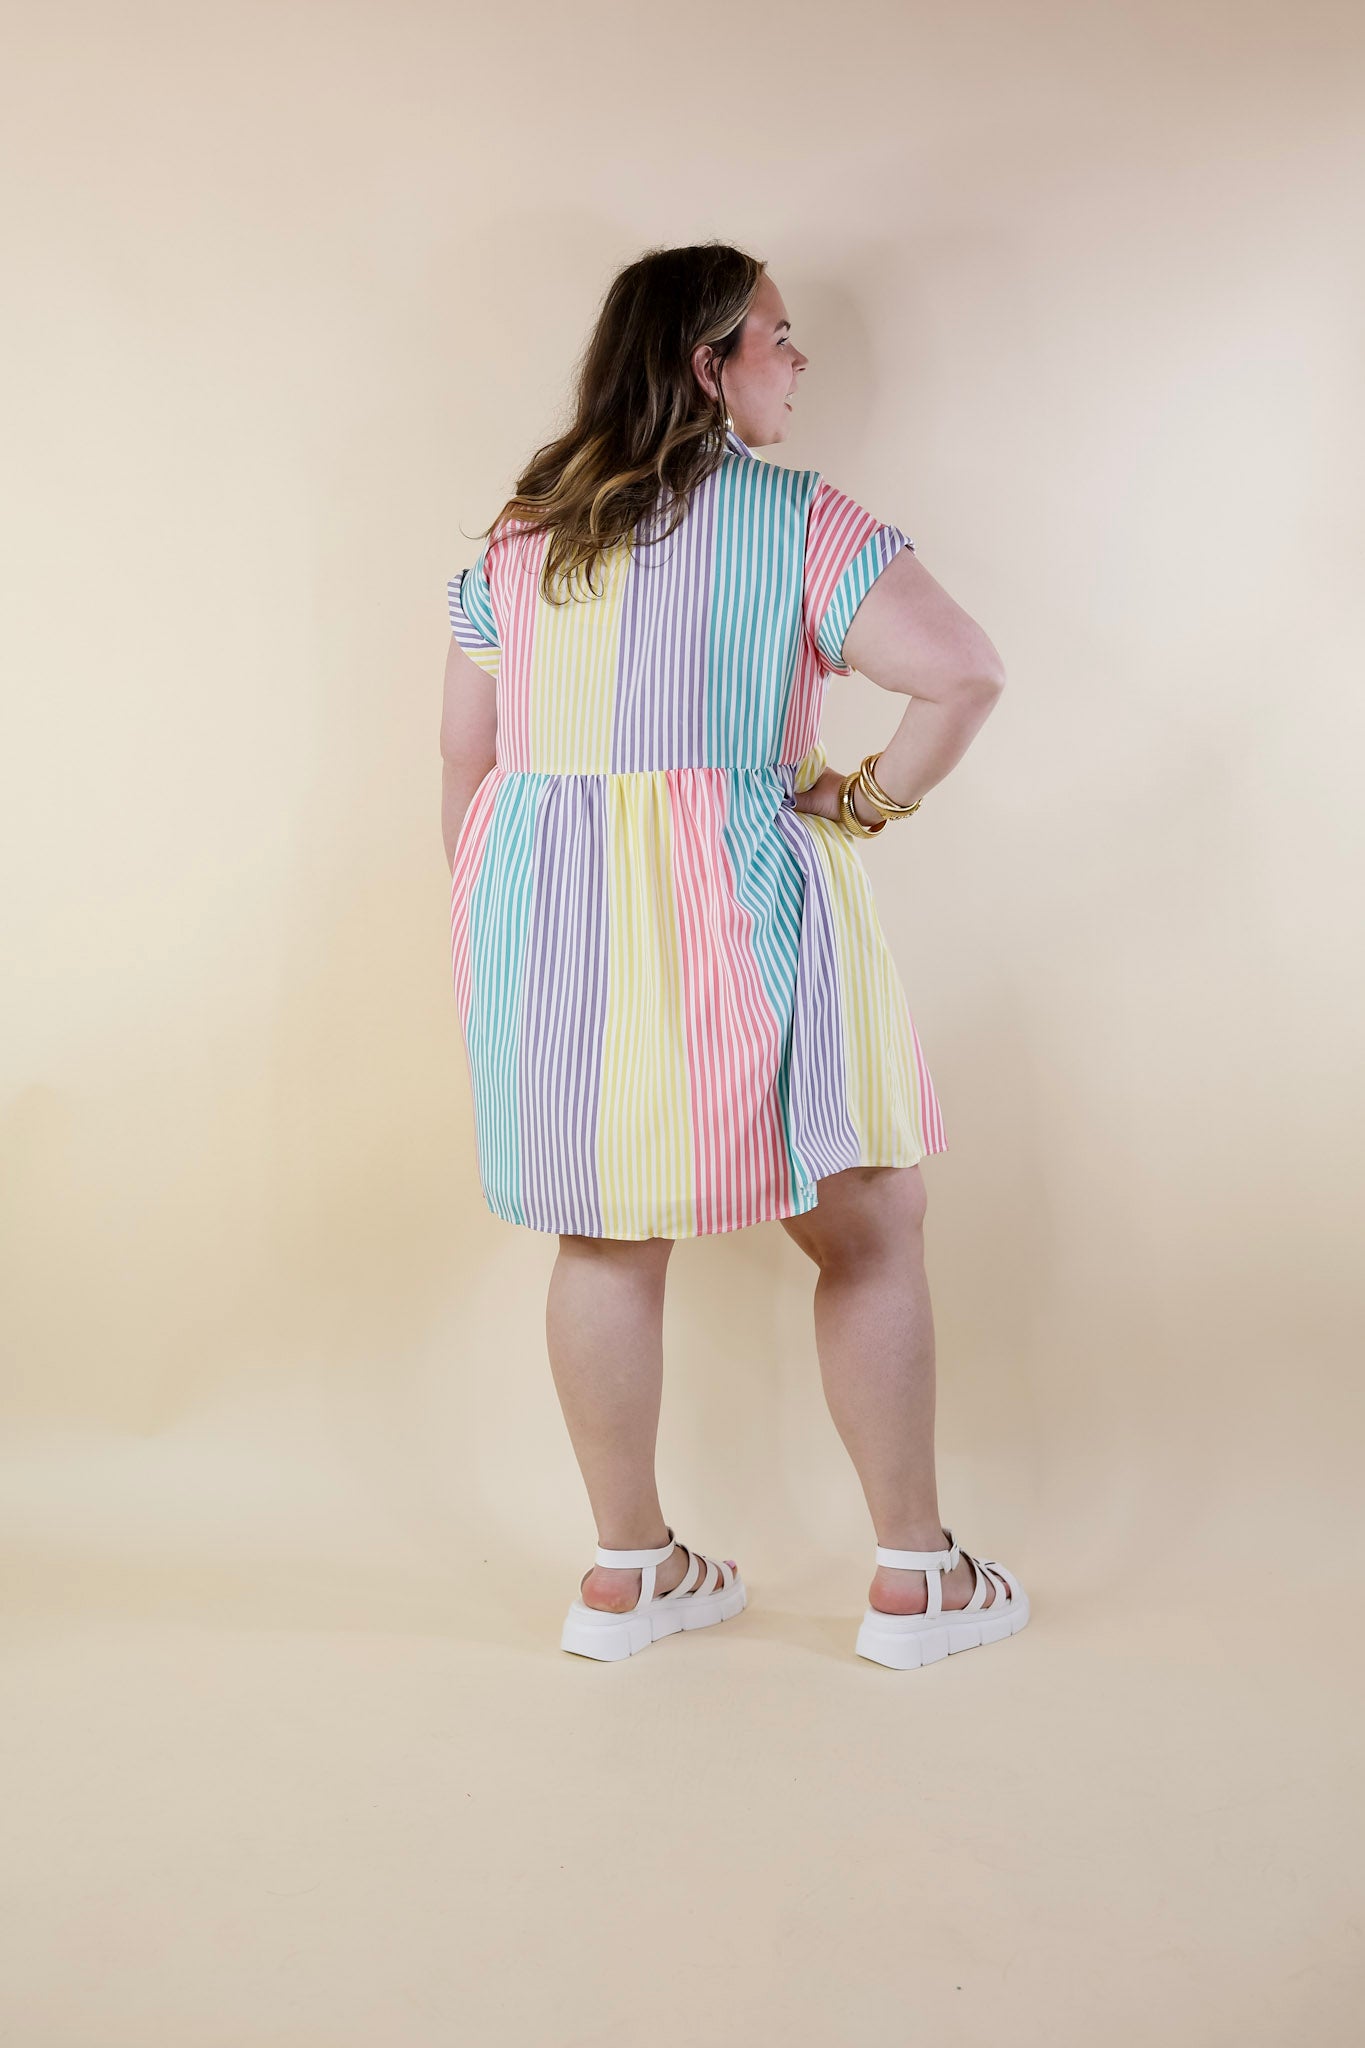 Spring Symphony Multi Color Striped Dress with Collar - Giddy Up Glamour Boutique